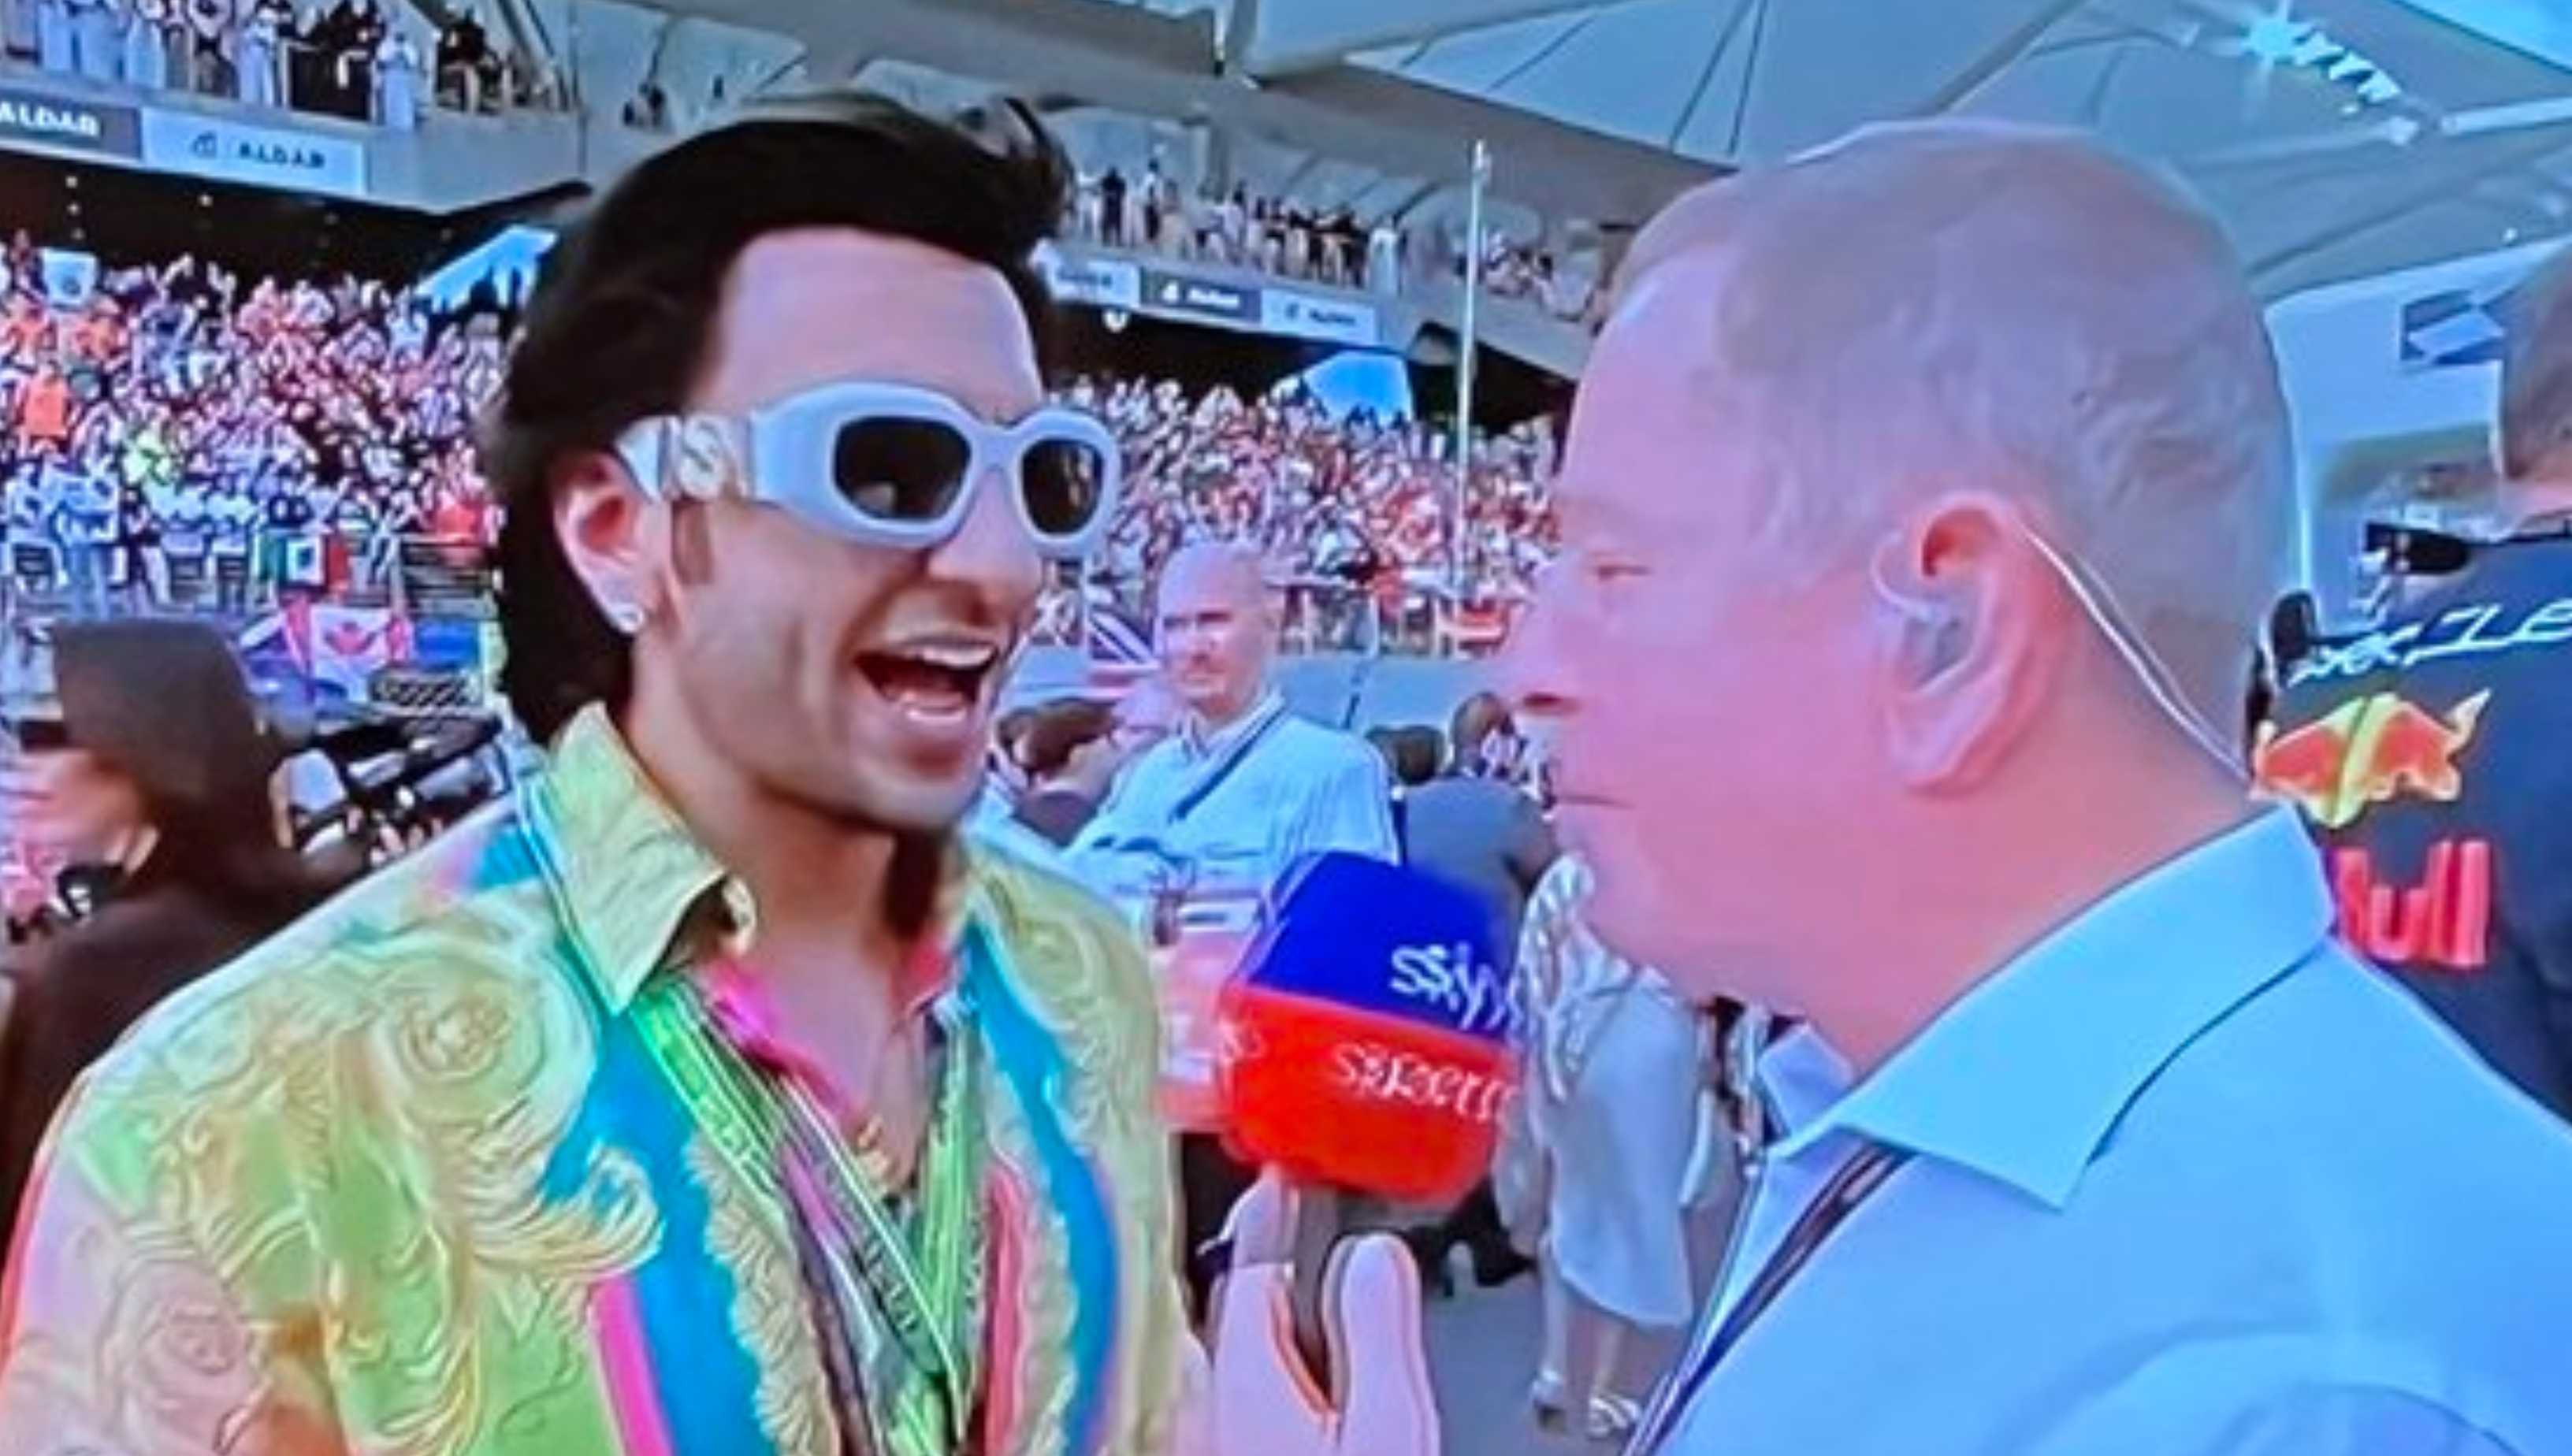 Ranveer Singh’s humility leaves fans gushing after F1 commentator Martin Brundle ‘momentarily’ forgets him; watch